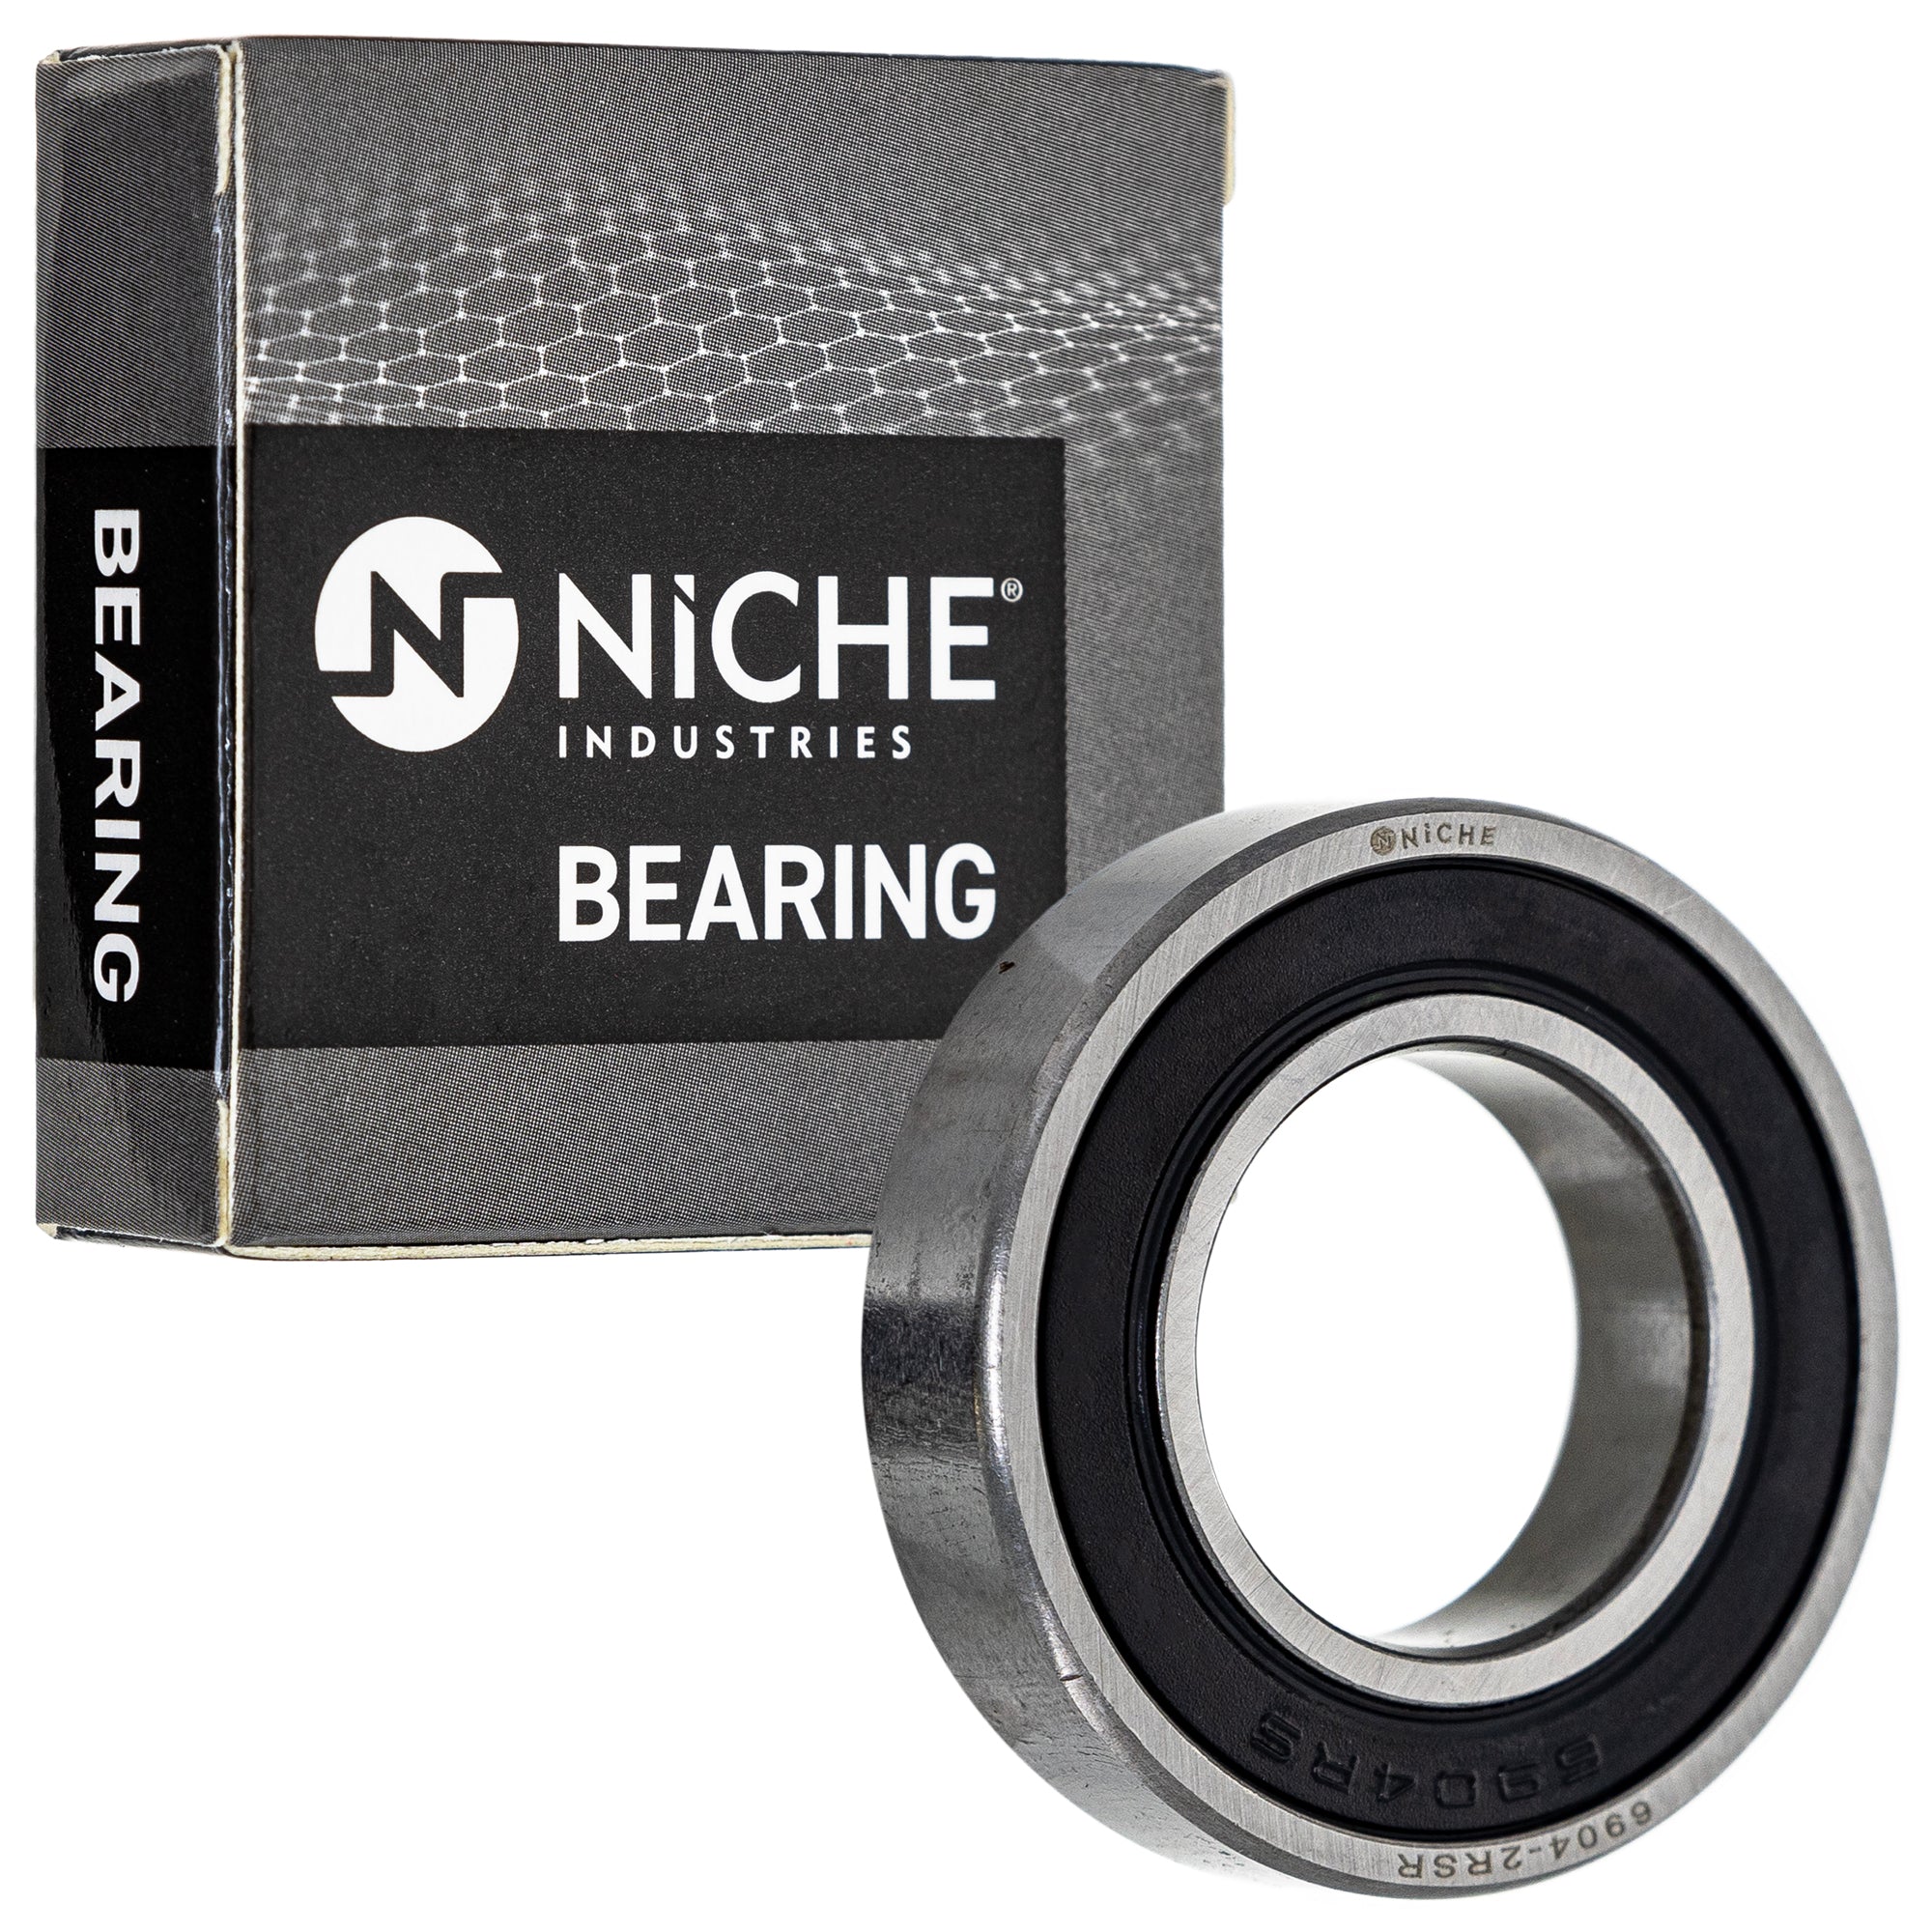 NICHE 519-CBB2287R Bearing & Seal Kit 2-Pack for zOTHER WR450F WR426F